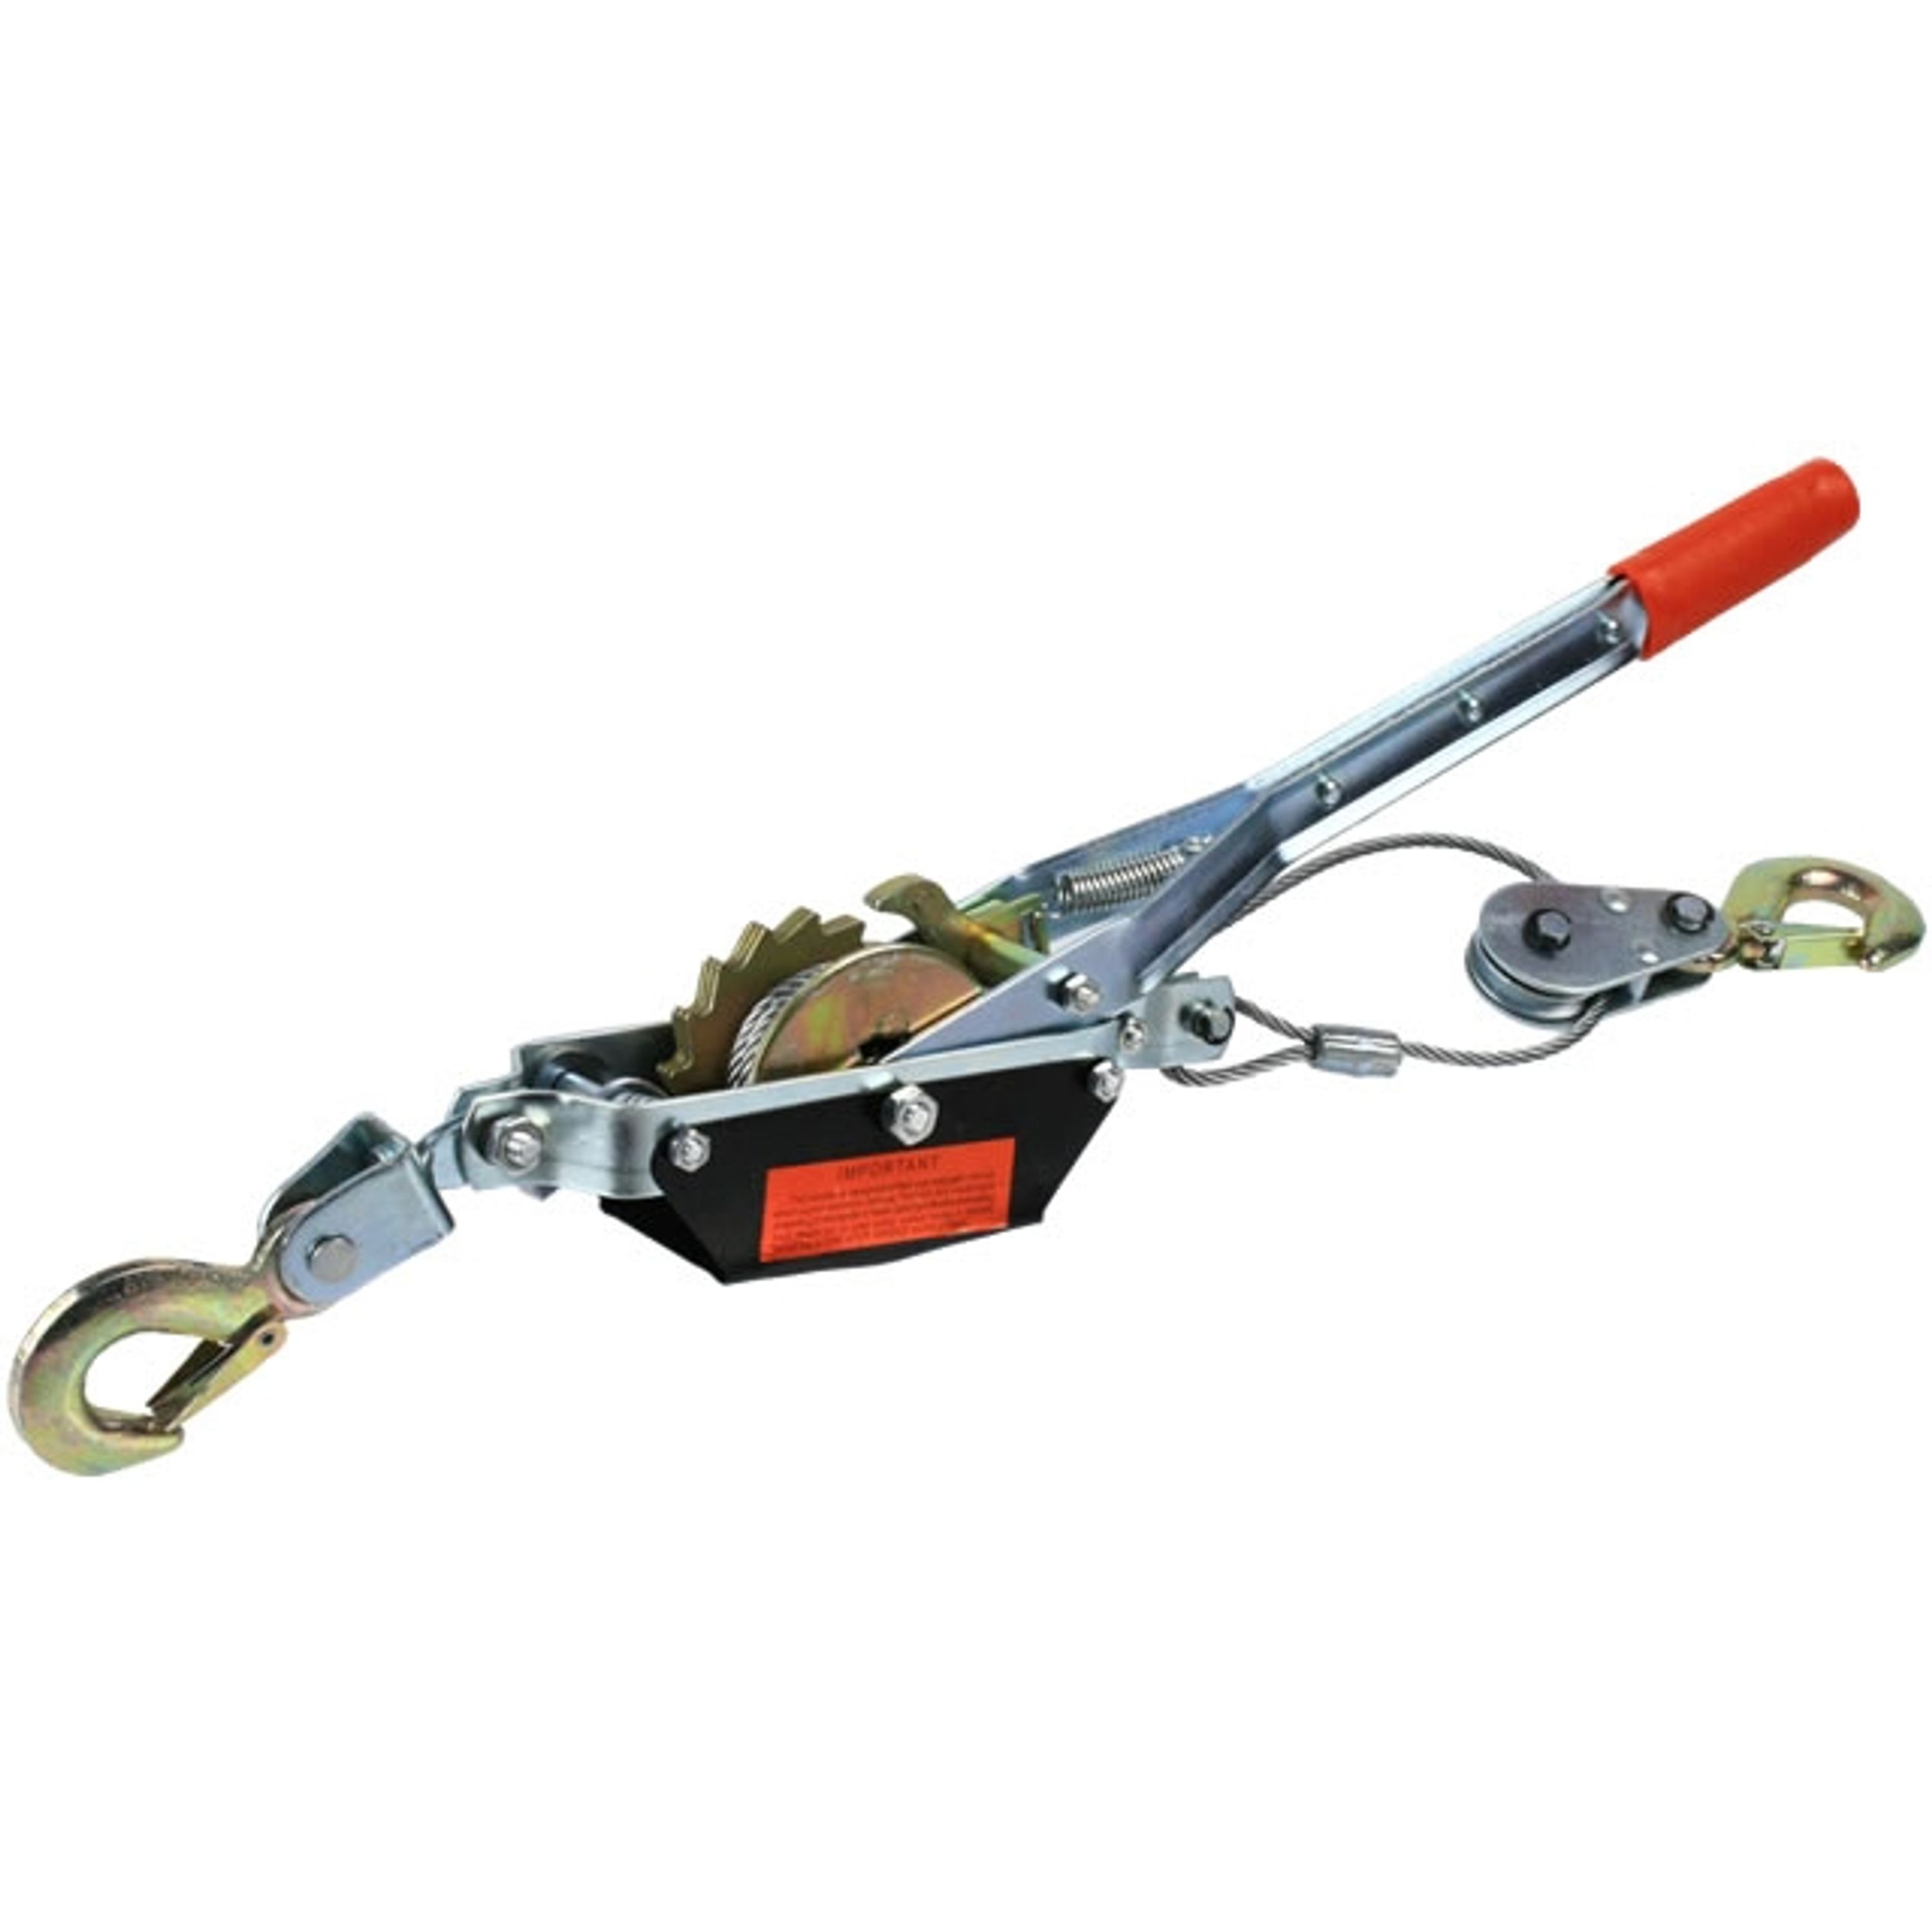 Towing Accessories: Tow Hooks, Cable Pullers  Tow Chains